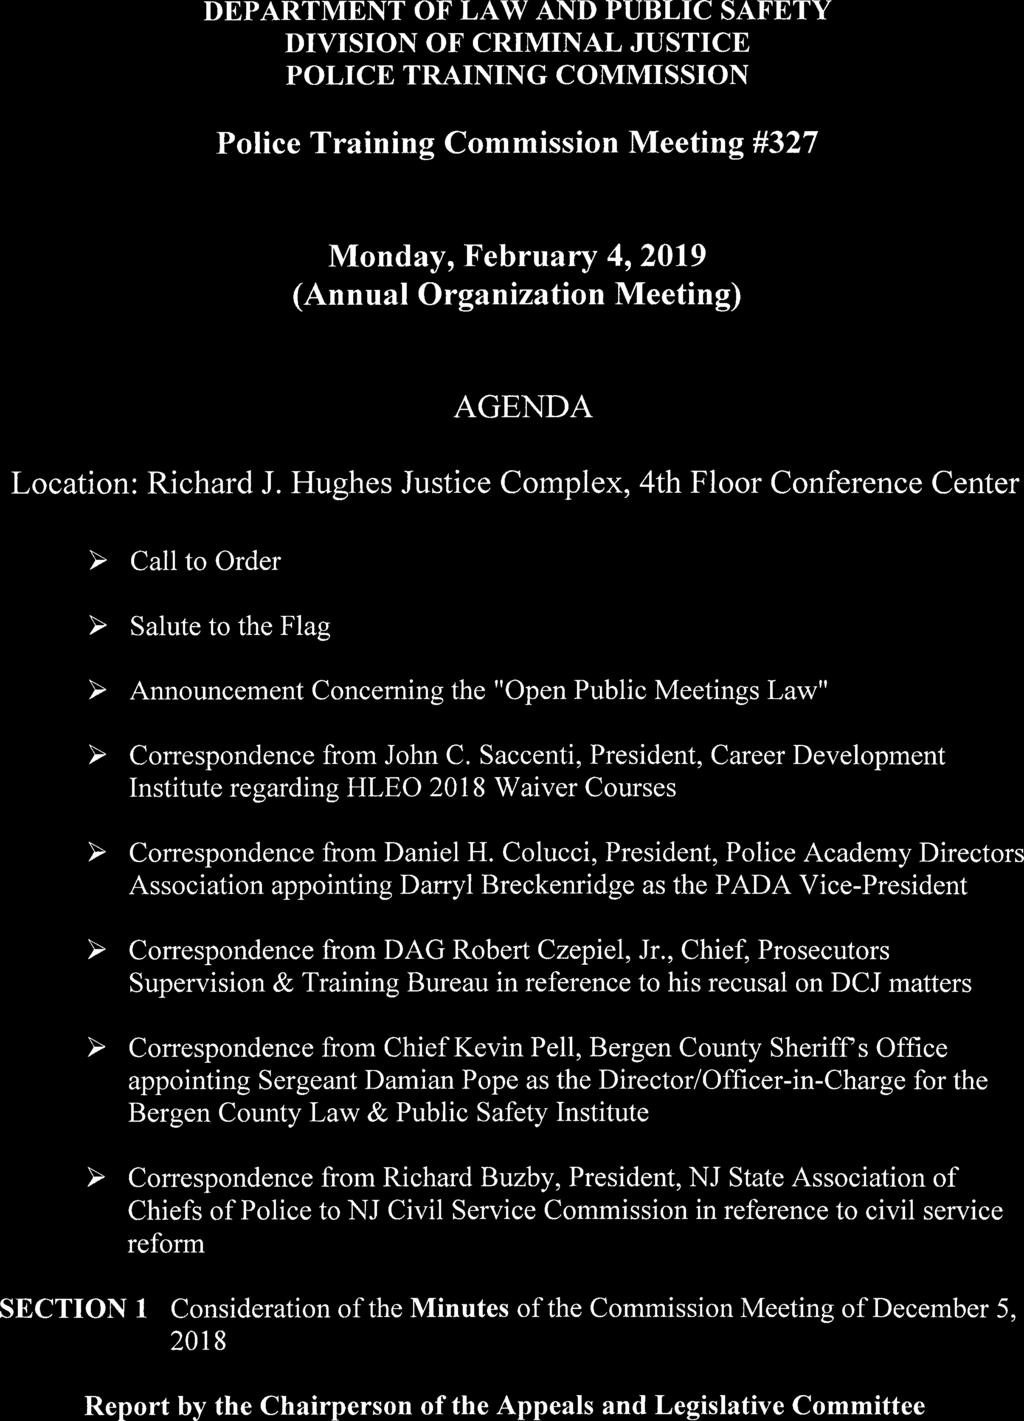 DEPARTMENT OF LAW AND PUBLIC SAFETY DIVISION OF CRIMINAL JUSTICE POLICE TRAINING COMMISSION Police Training Commission Meeting #327 Monday, February 4, 2019 (Annual Organization Meeting) AGENDA